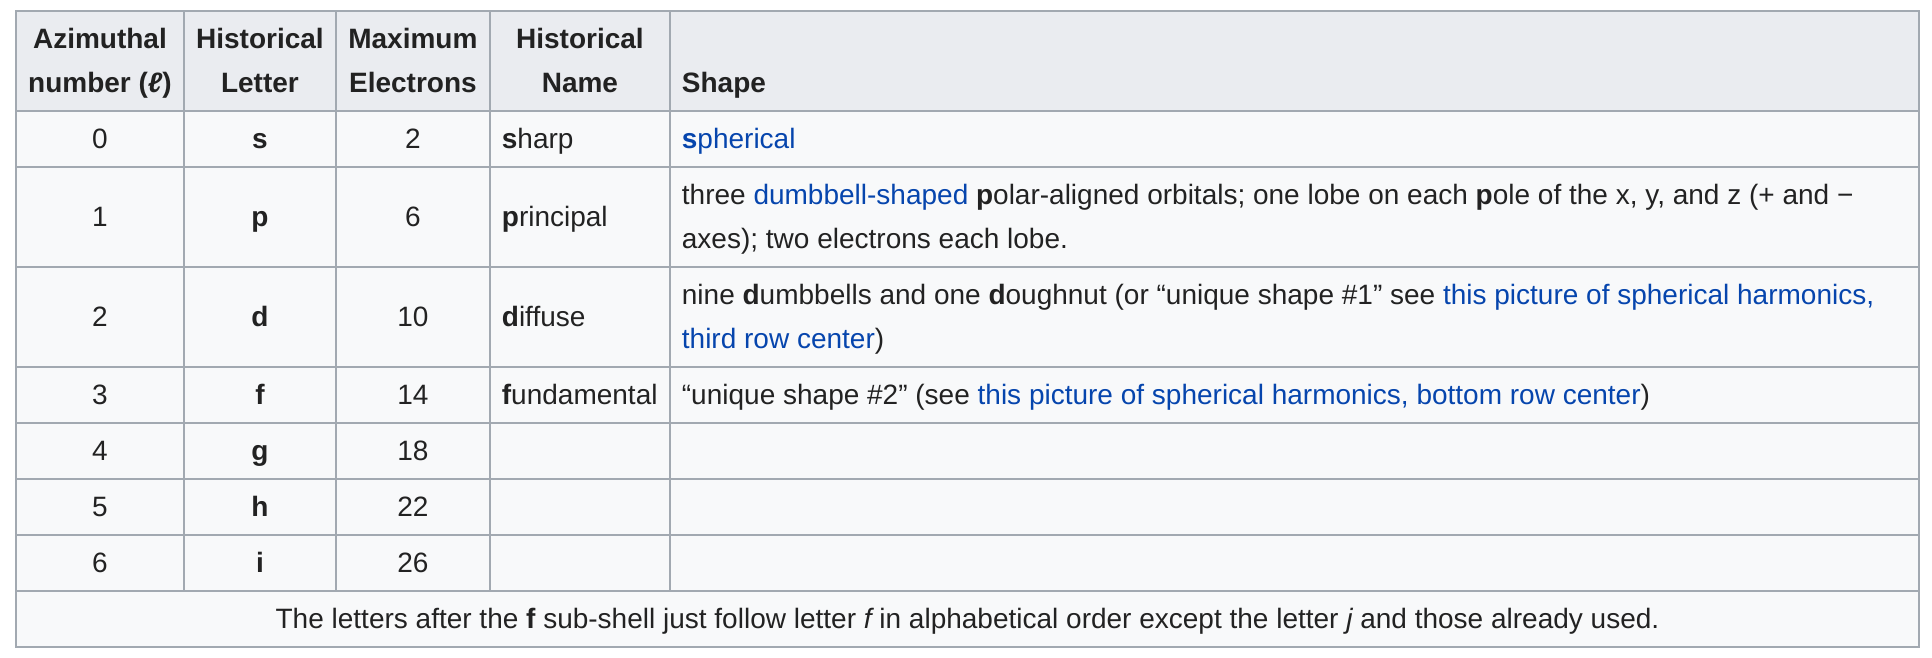 Table from the Wikipedia page for Azimuthal quantum number[2]